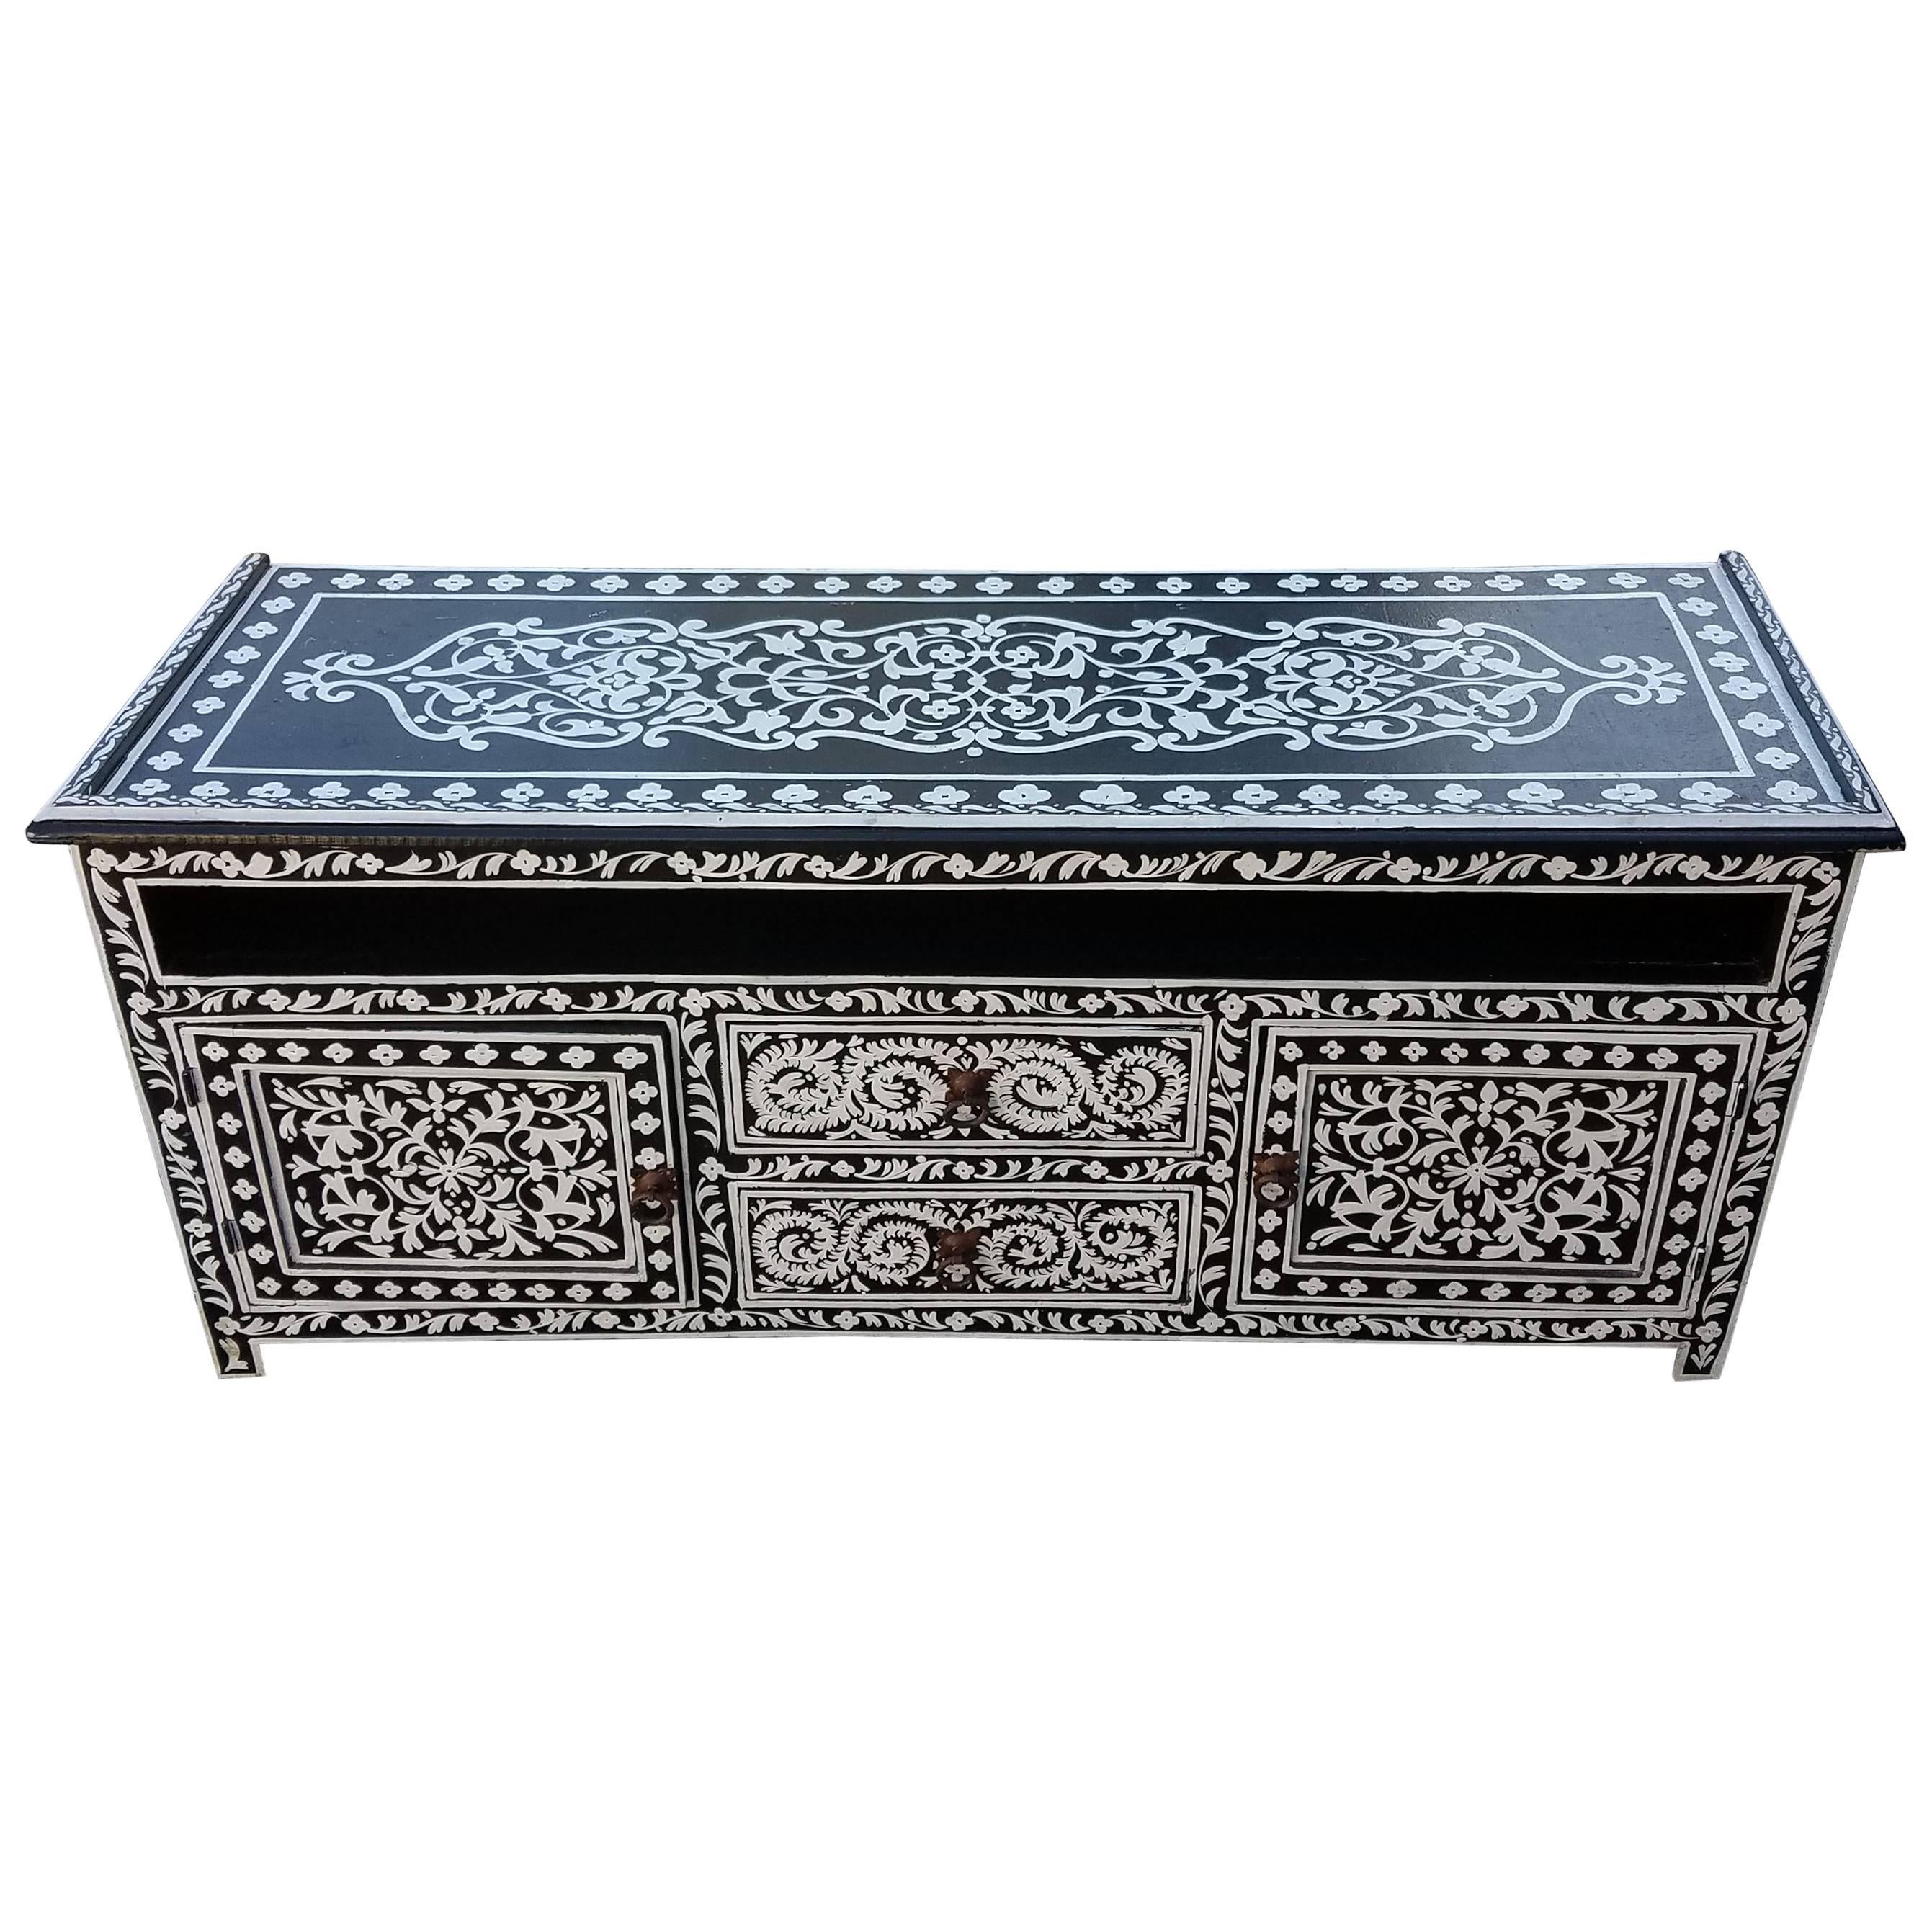 Moroccan Hand-Painted Wooden Media Stand, Black and White